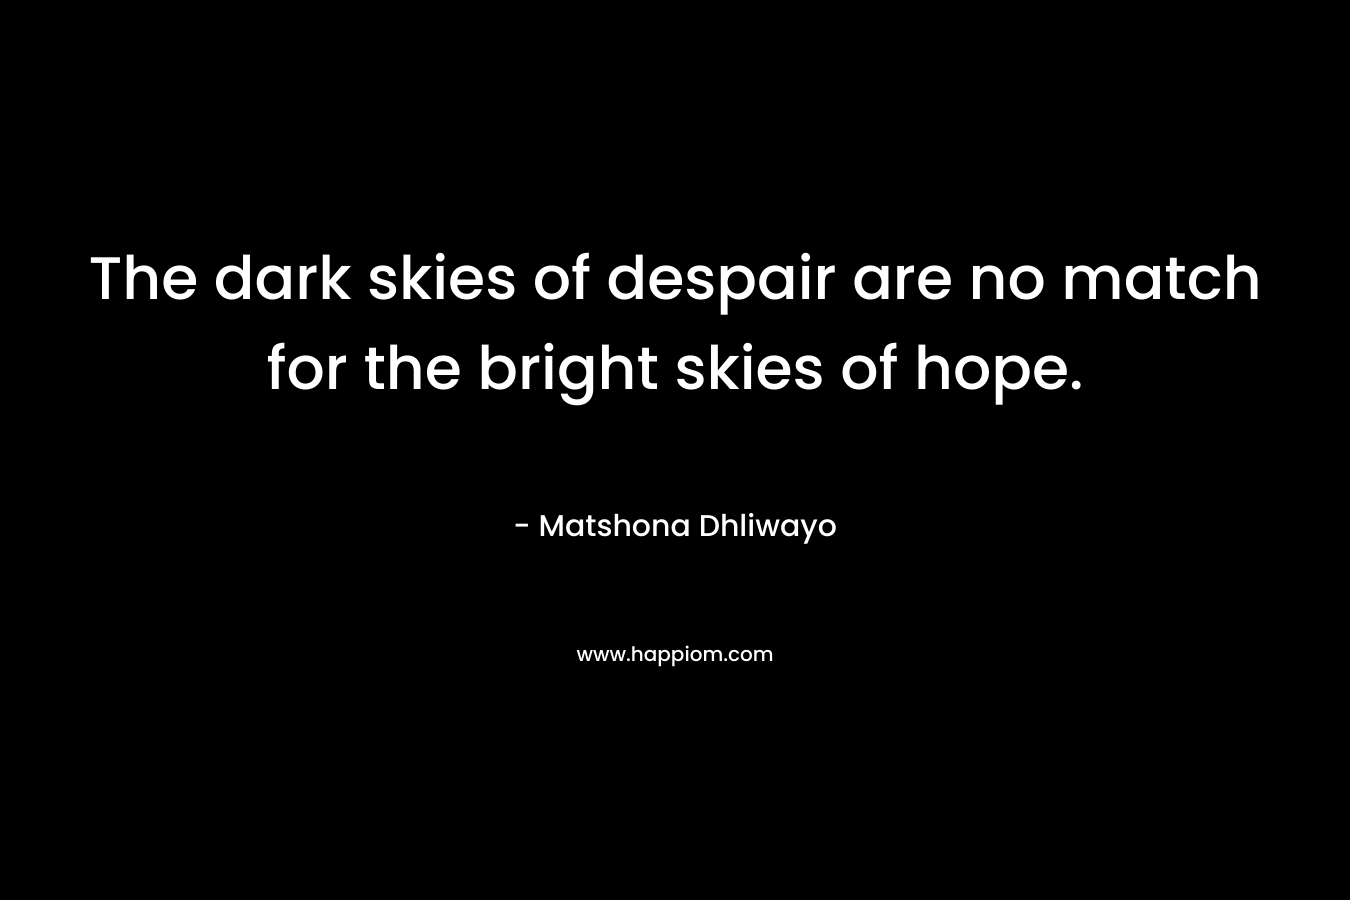 The dark skies of despair are no match for the bright skies of hope.